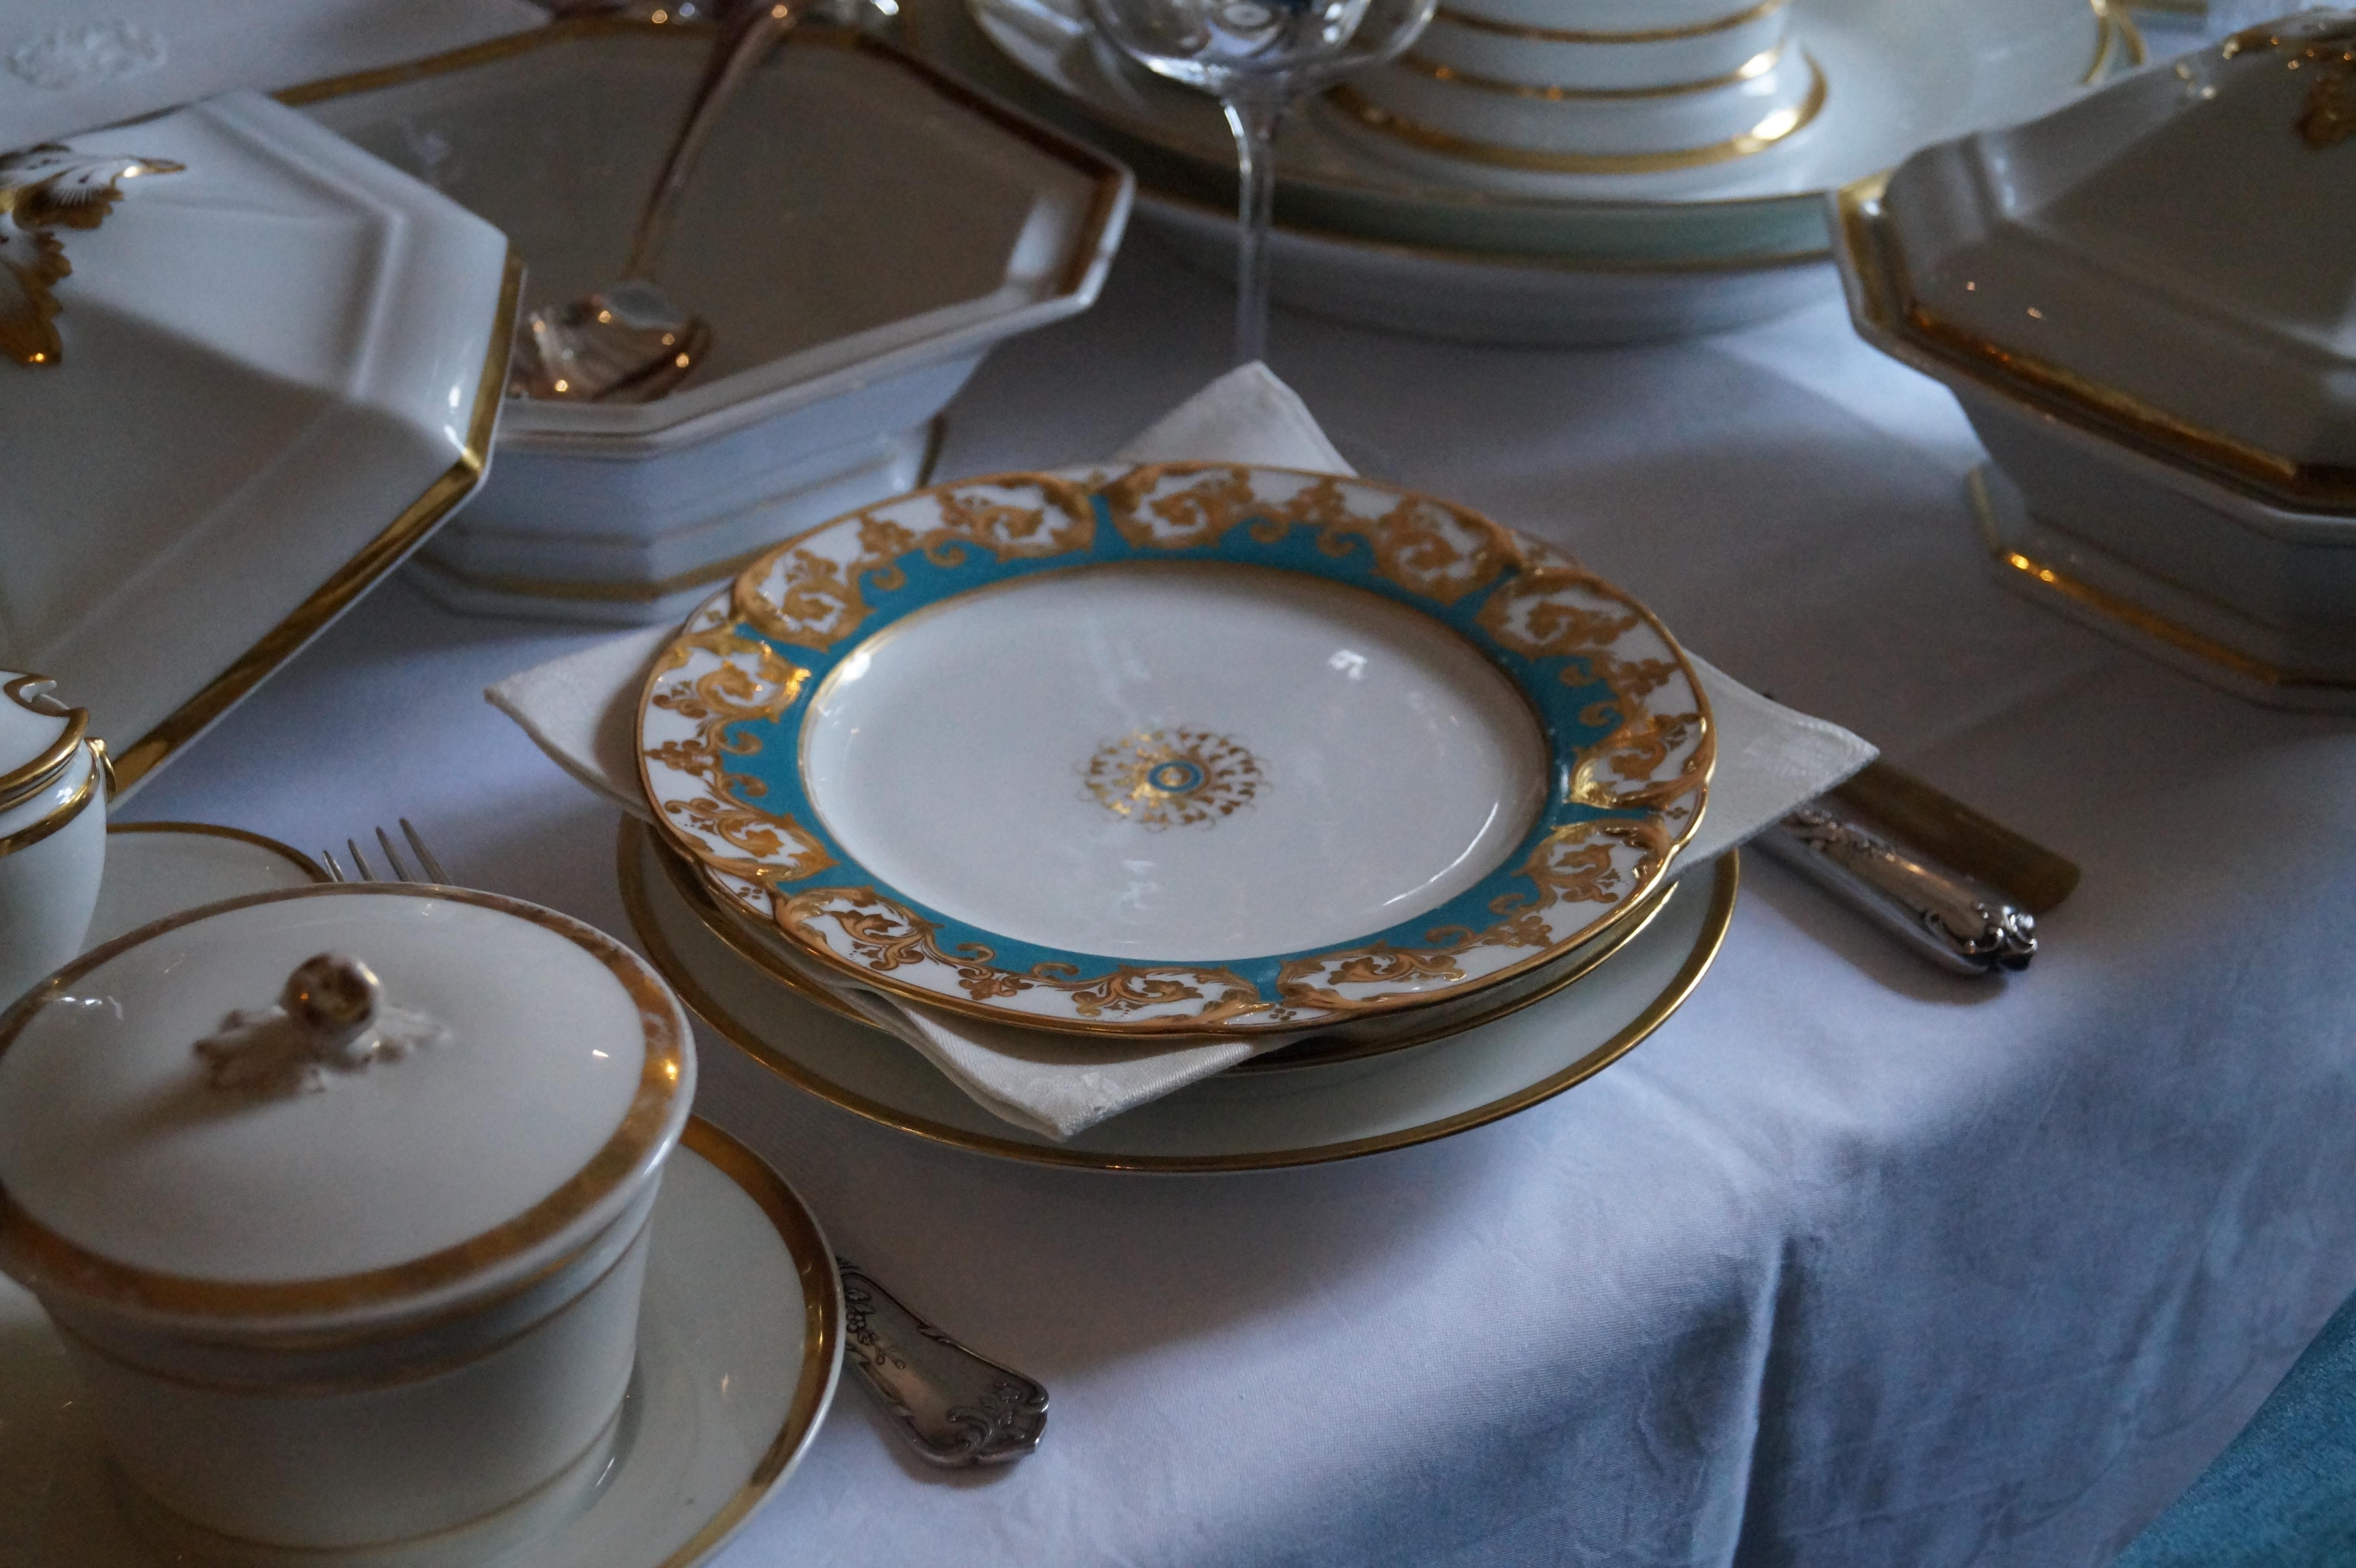 Rare Richly Decorated Old Paris Dessert Plates, France, 1880s

12 plates, France, circa 1880.
Chique and richly decorated with gold, peach and blue.
Some of the plates are marked with -Denuelle a Paris-

Measures: Diameter 22cm.